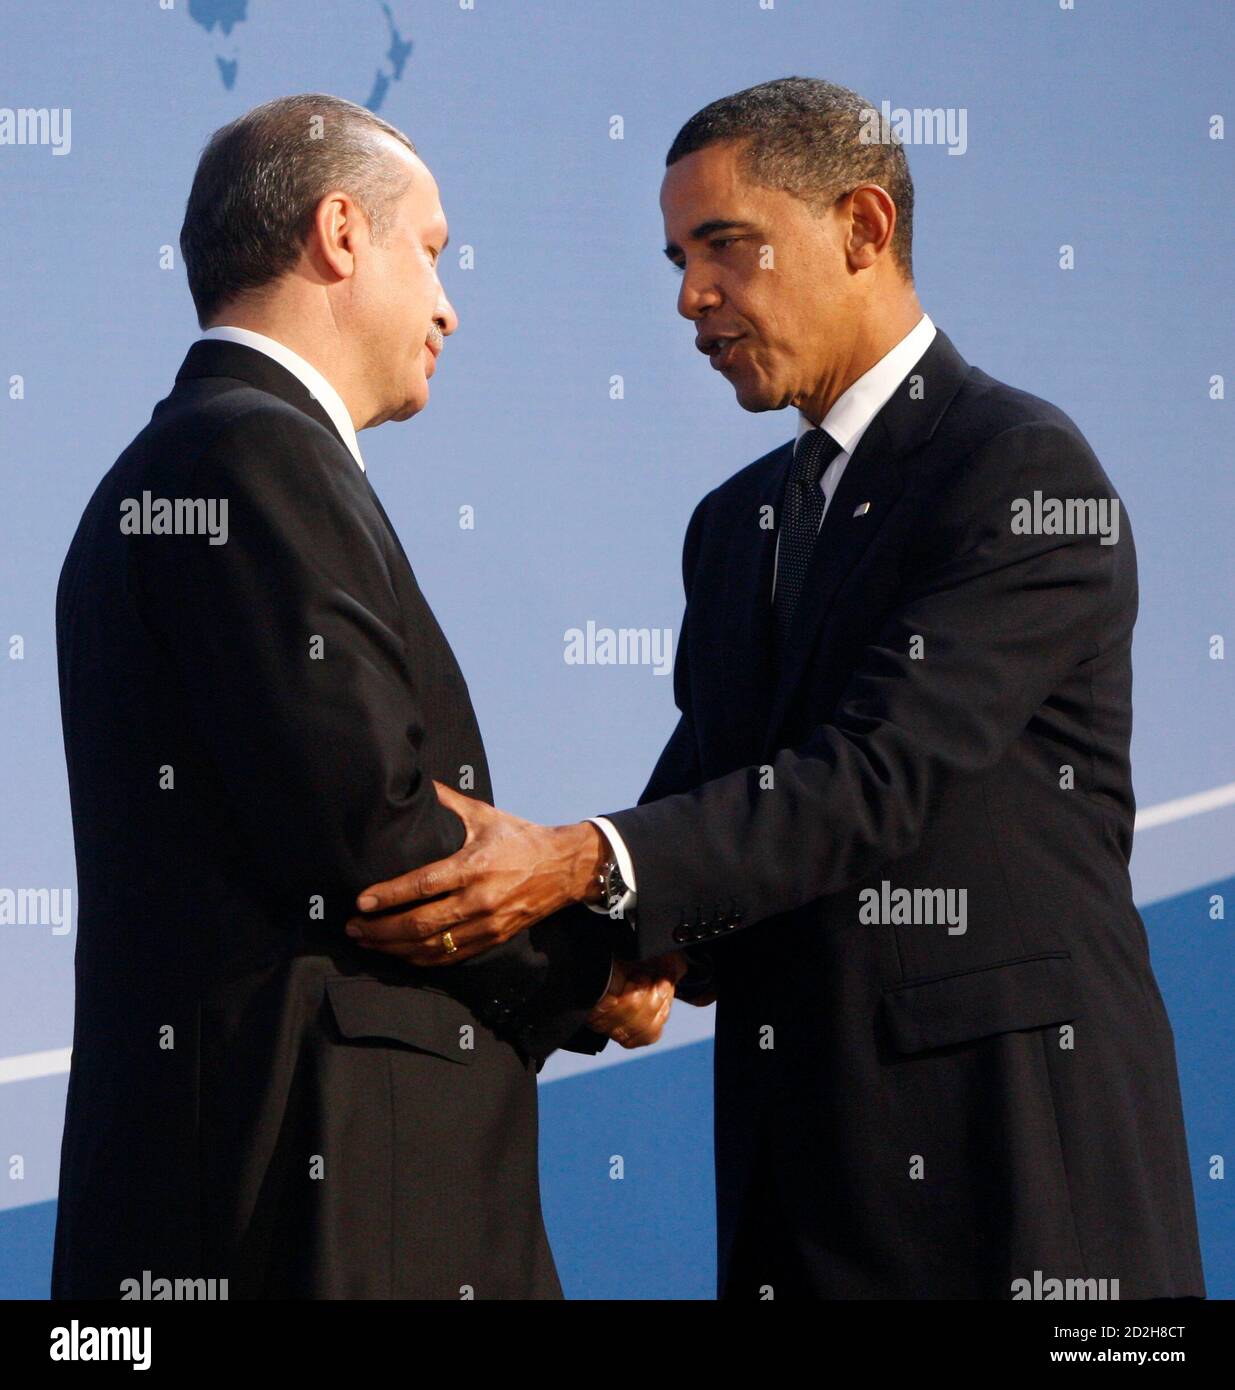 Turkey's Prime Minister Tayyip Erdogan (L) is greeted by U.S. President Barack Obama as they arrive at the Phipps Conservatory for an opening reception and working dinner for heads of delegation at the Pittsburgh G20 Summit in Pittsburgh, Pennsylvania September 24, 2009.     REUTERS/Chris Wattie (UNITED STATES POLITICS) Stock Photo